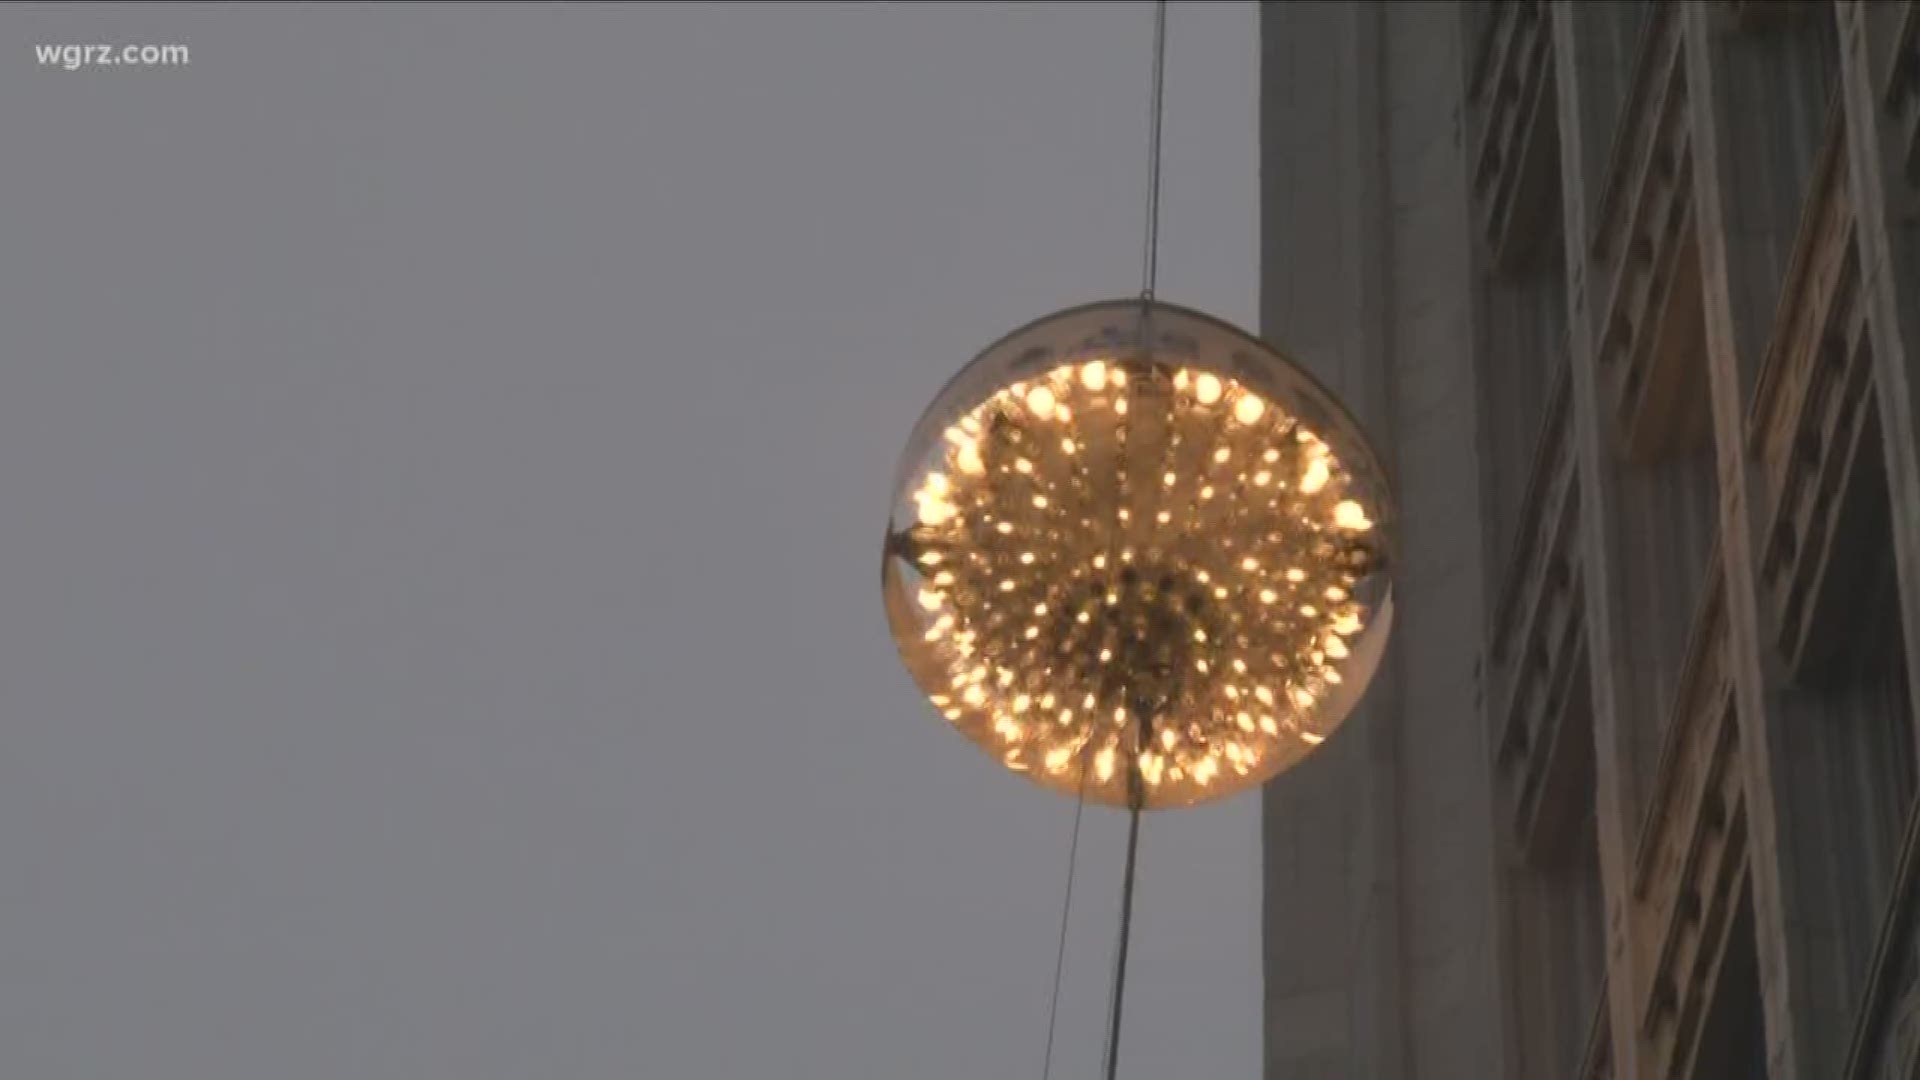 Buffalo Prepares For New Year's Eve Ball Drop